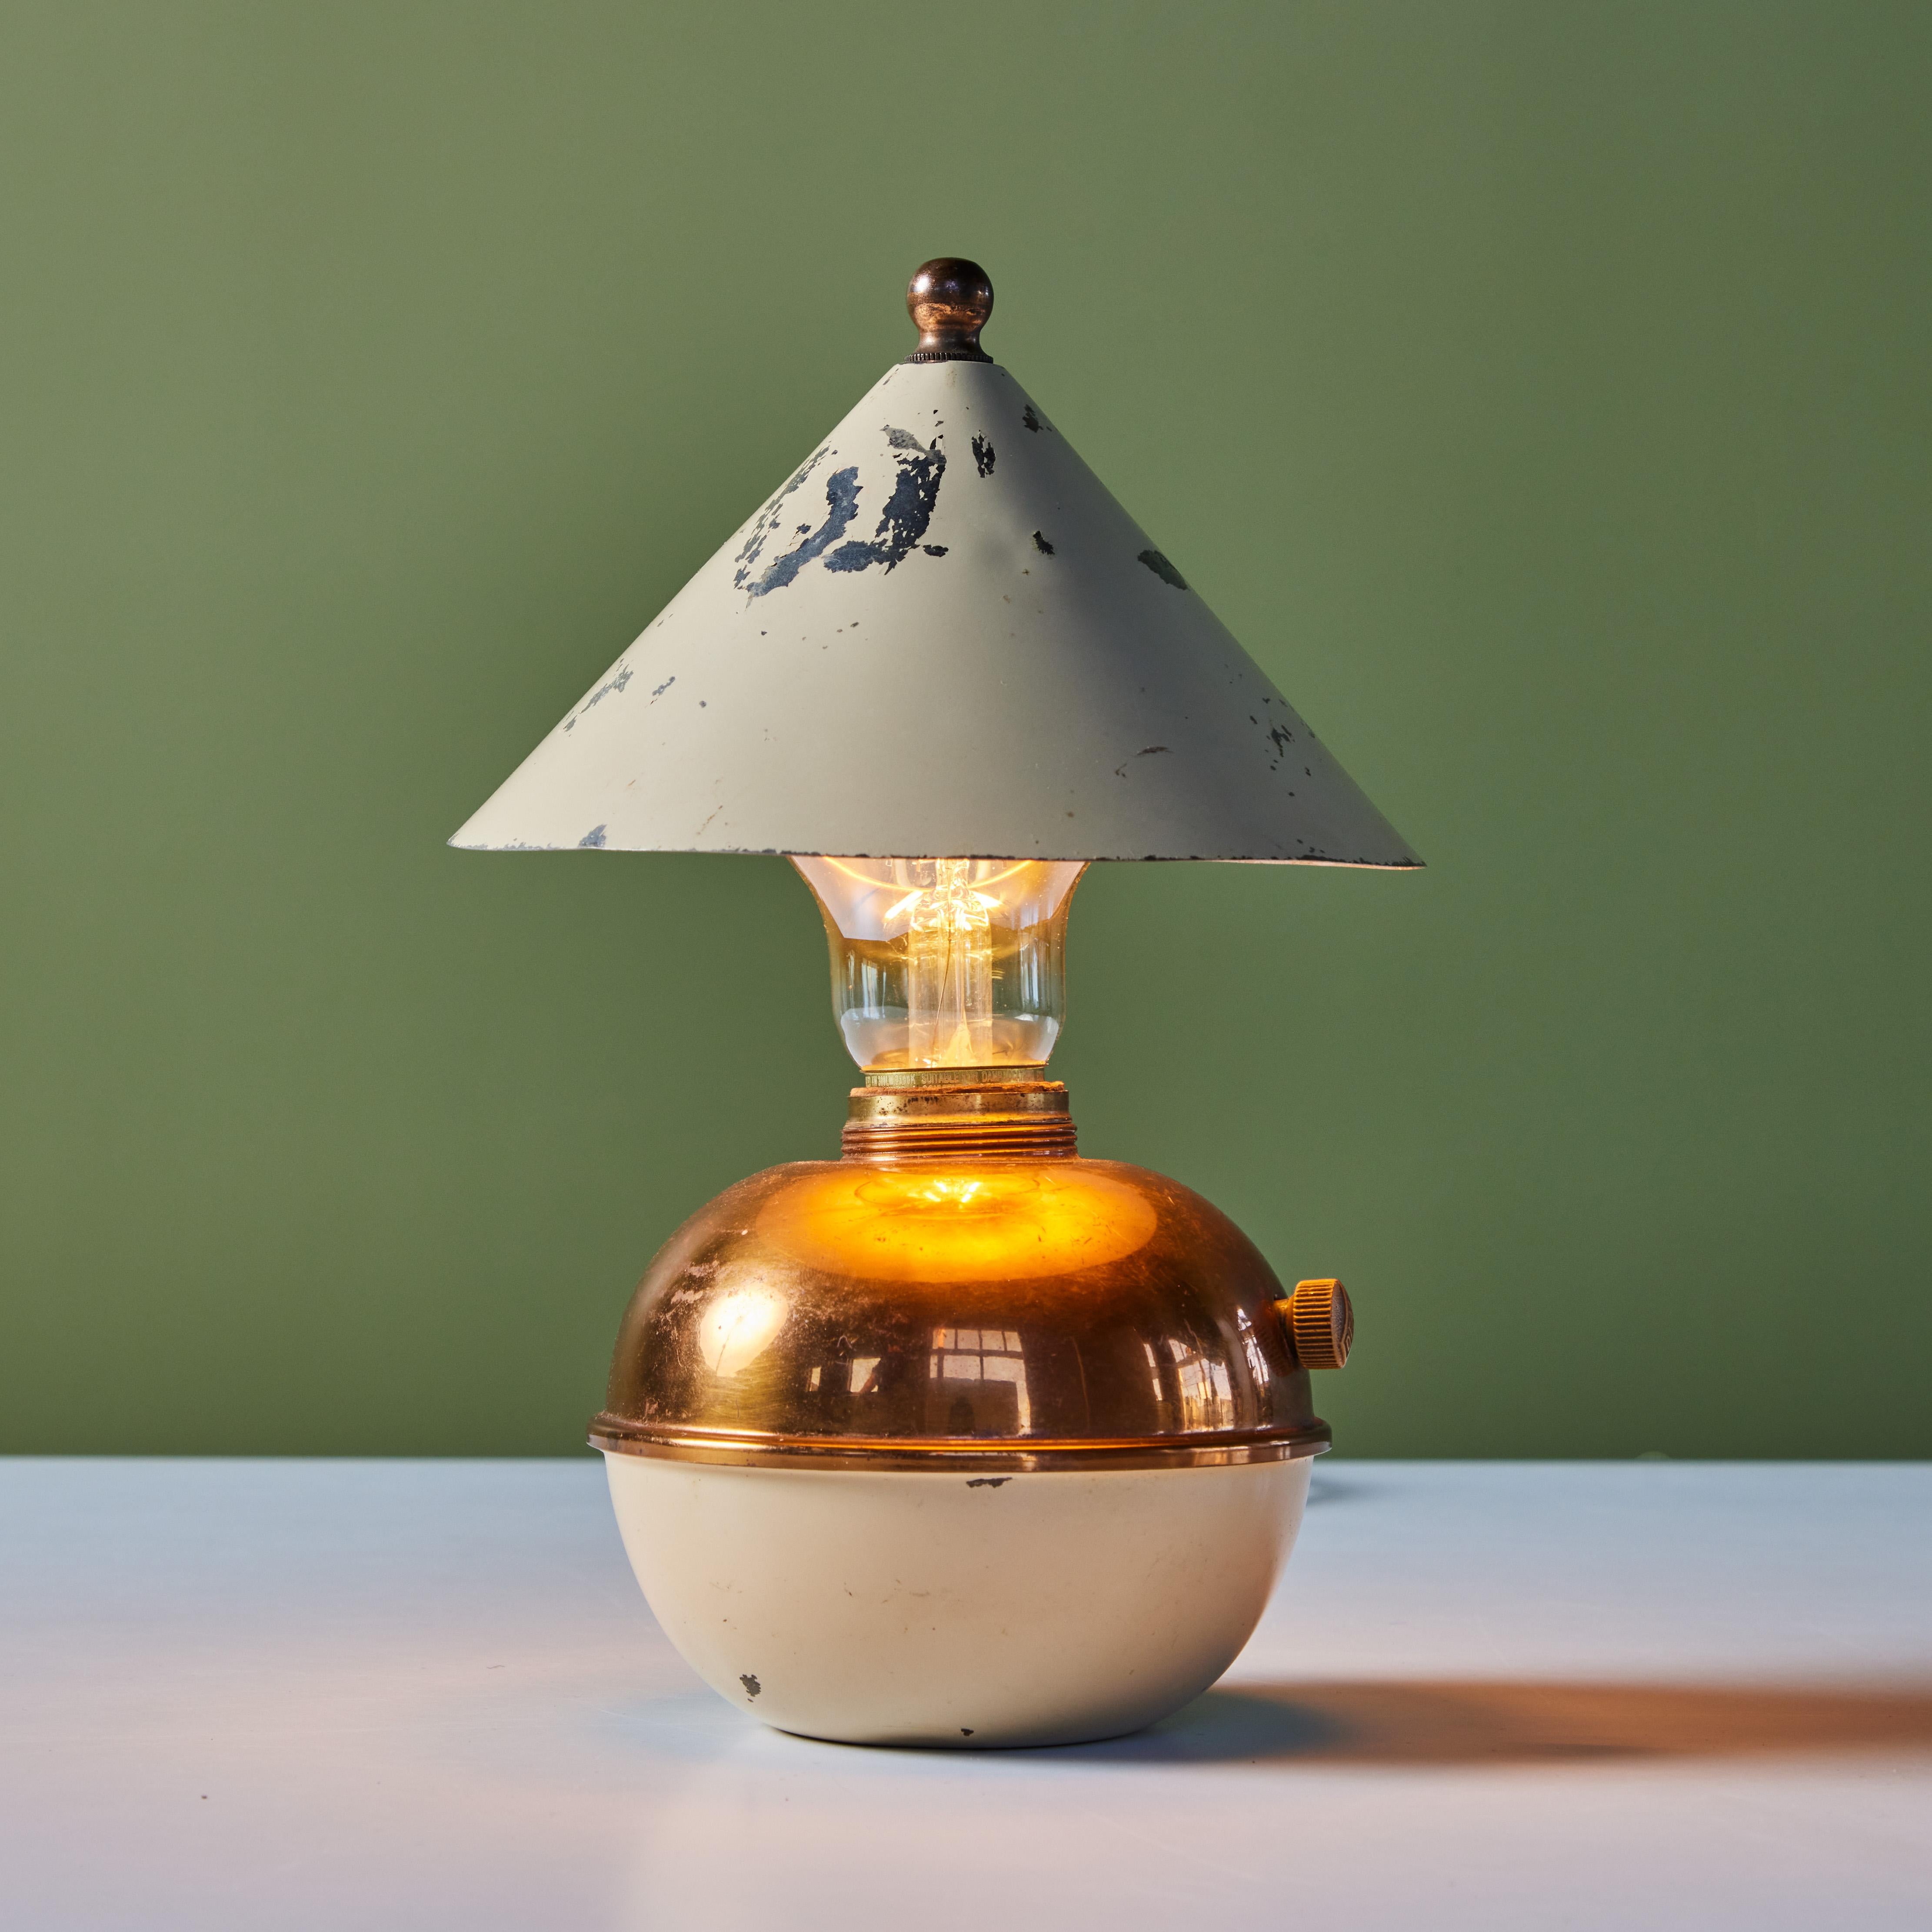 Petite copper and enamel table lamp by Ruth Gerth for Chase, c.1930s, USA. The Art Deco lamp features a cone shaped shade in white enamel and bulb body, half copper and half enamel. The minimalist design is playful and a fun piece to add to a shelf